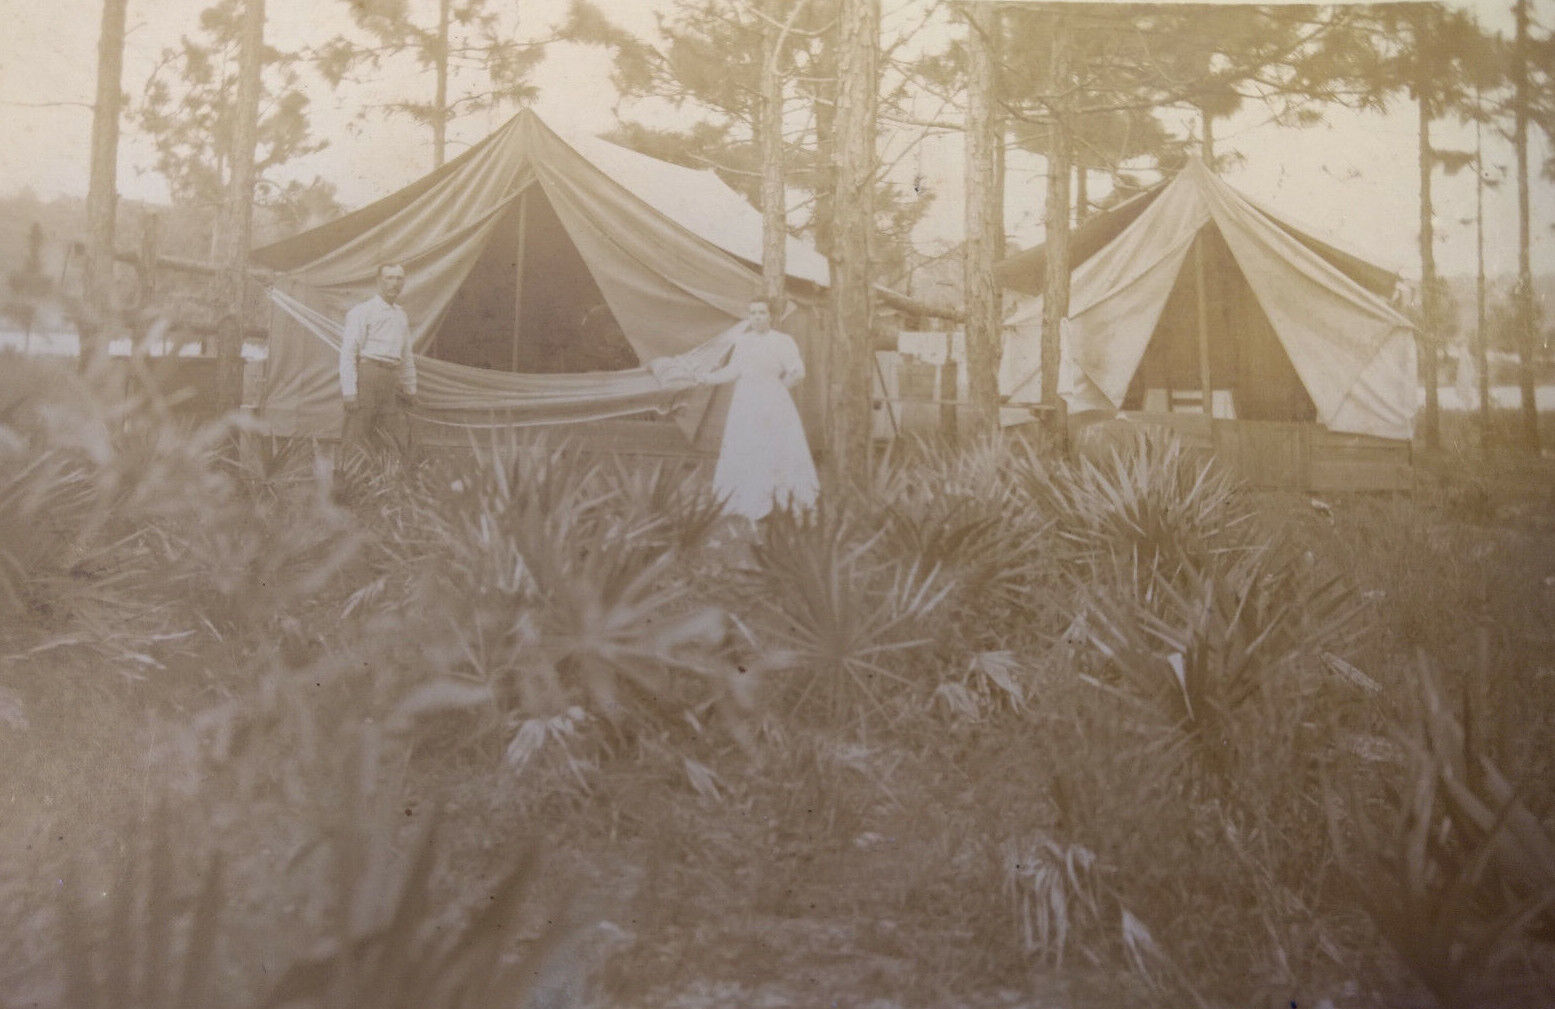 VTG Postcard Early c1900s Man Woman Camping Tents Woods RPPC Photo AZO Unposted